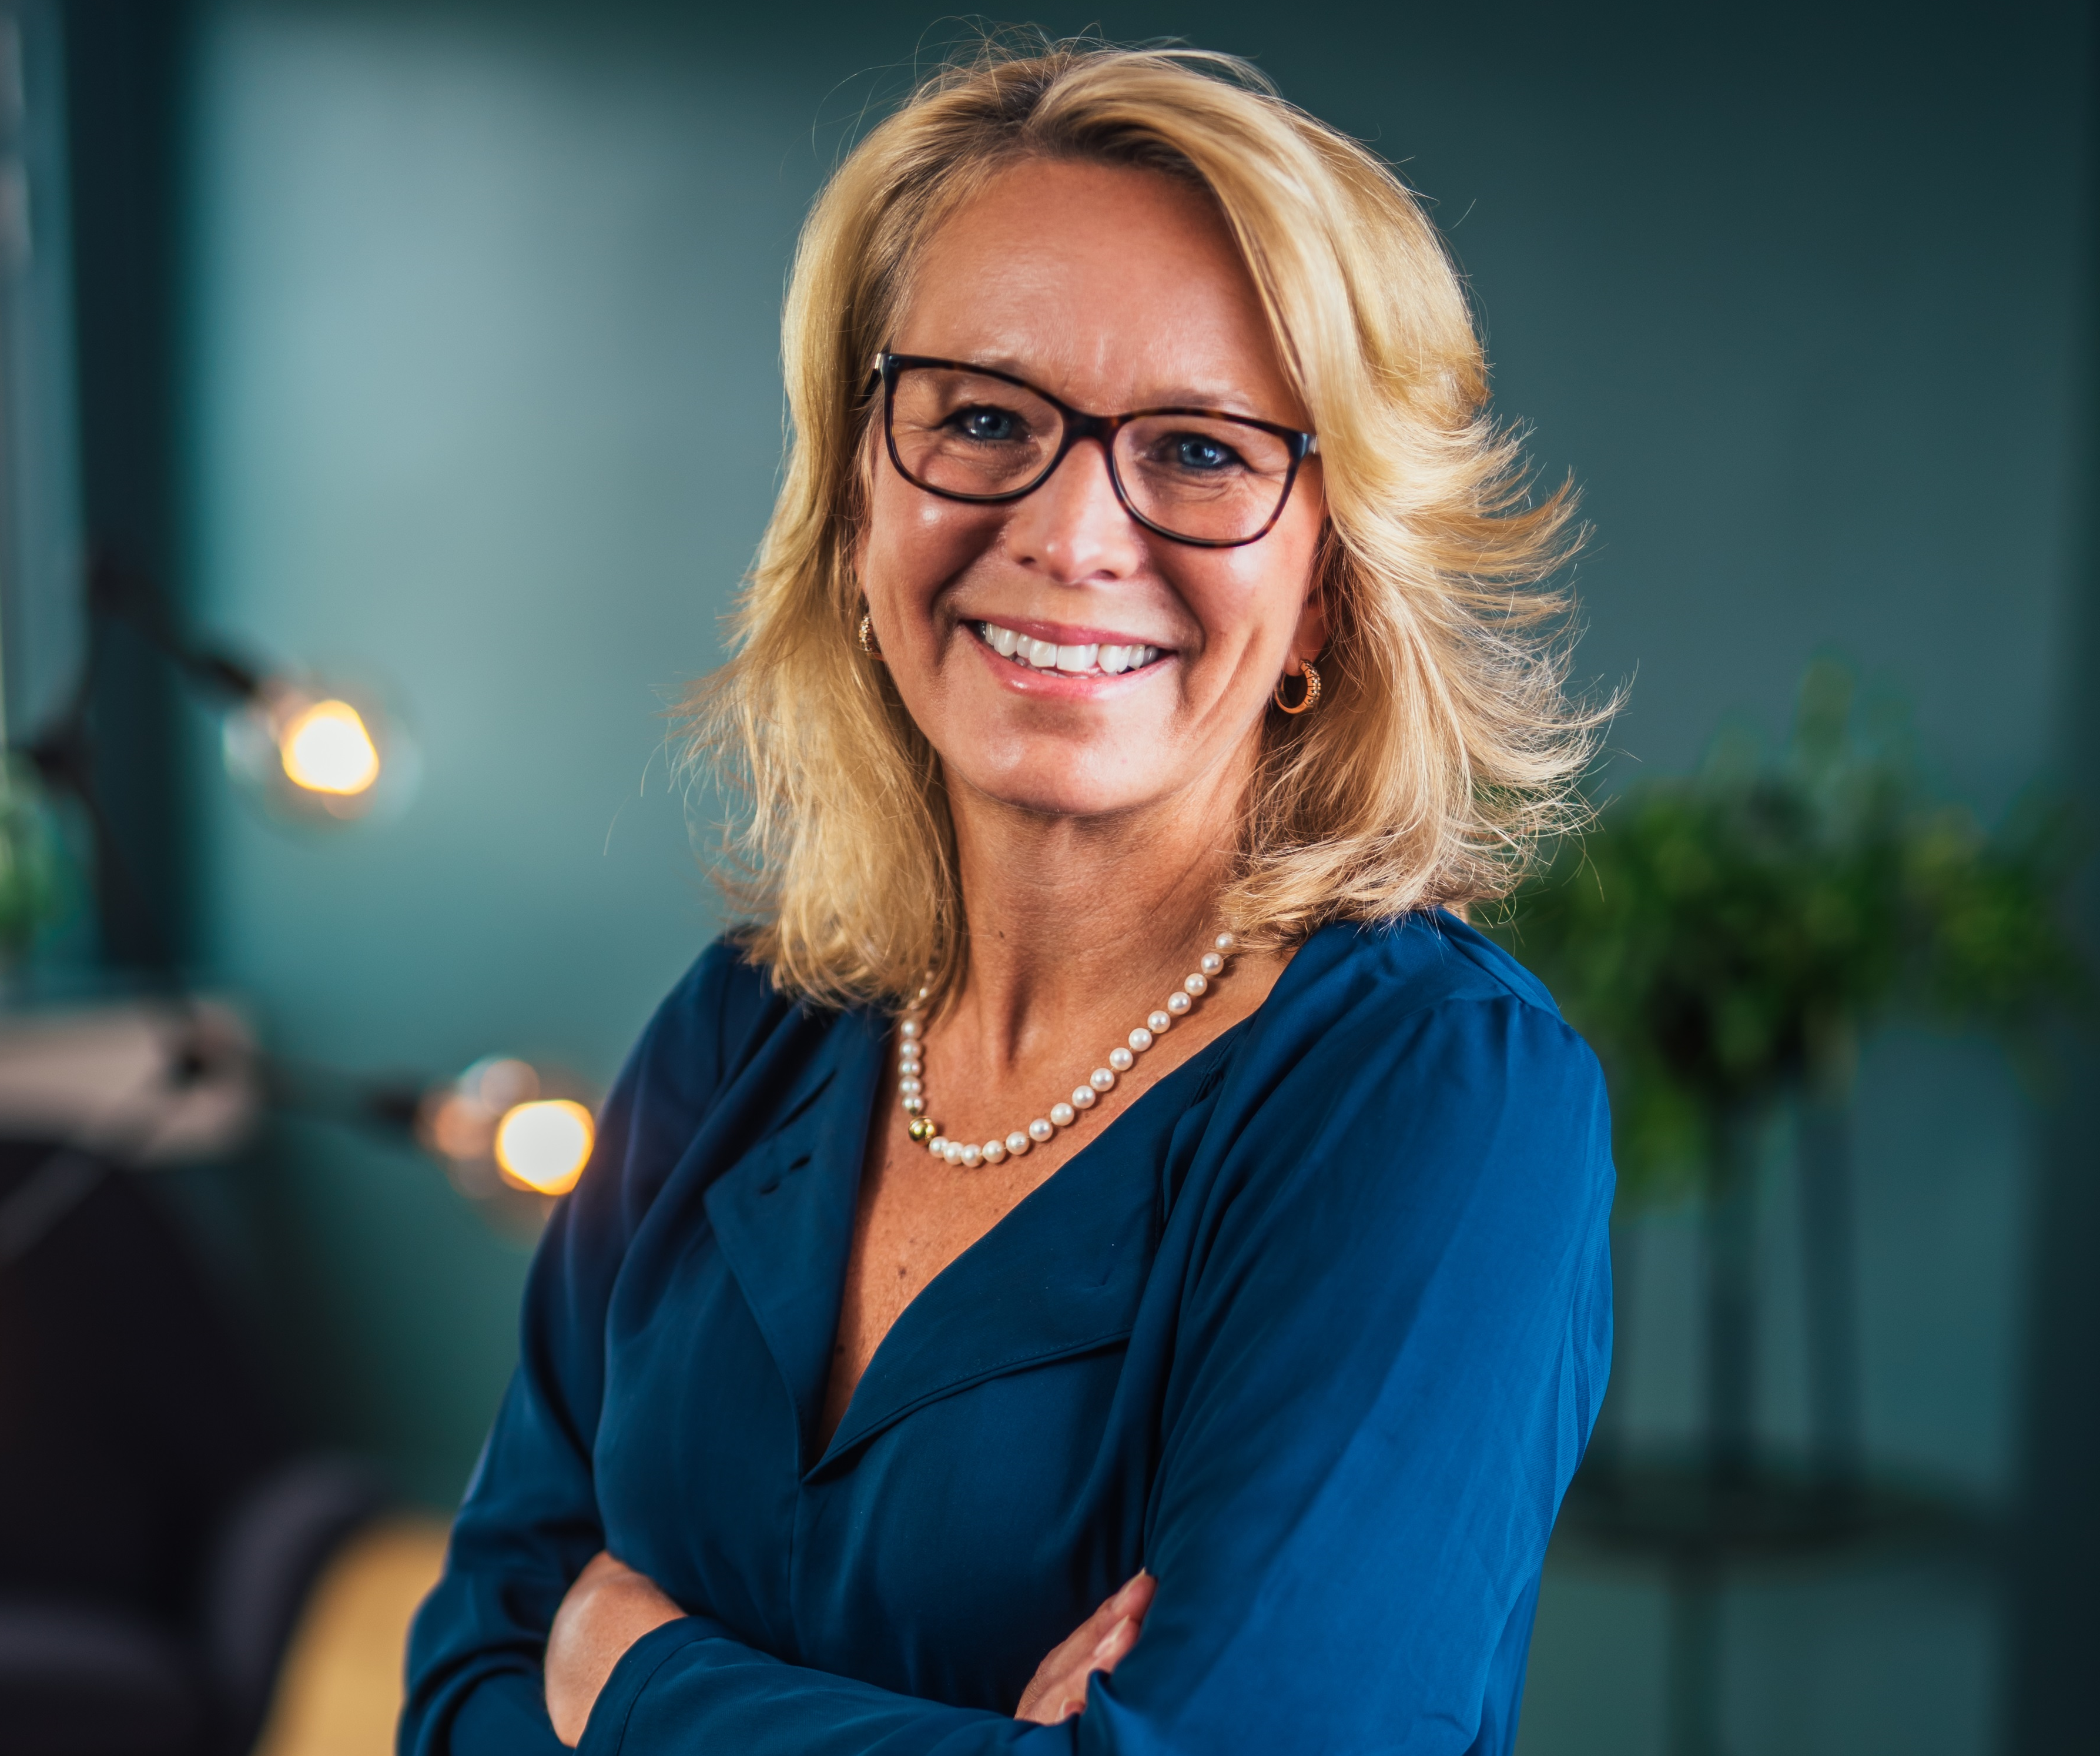 Exclusive sitdown with IAR’s newly appointed CEO Cecilia Wachtmeister